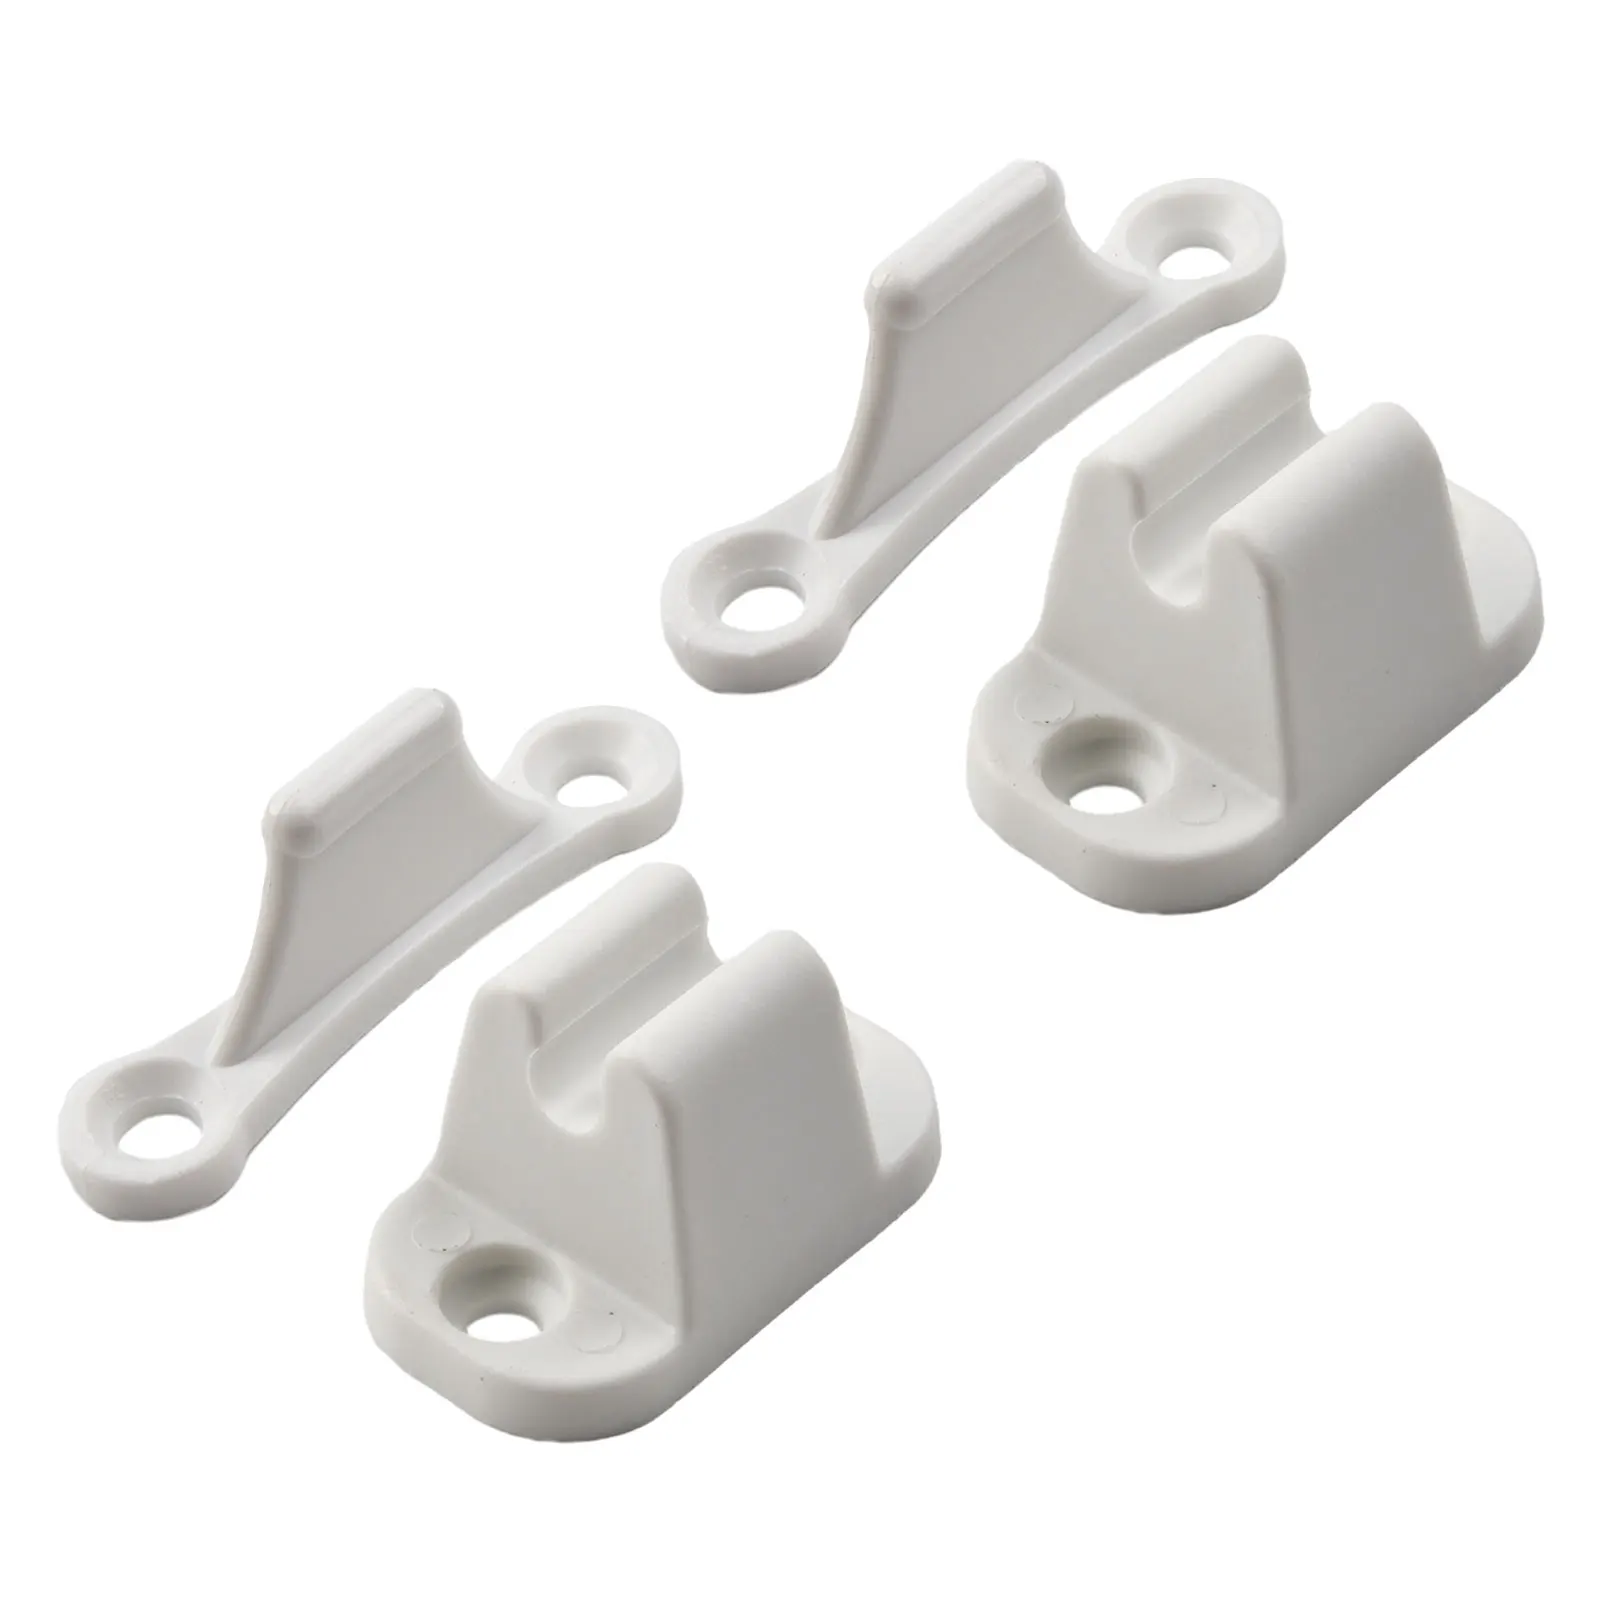 Brand New Door Retainer Catch Door Catch Female Section Male Section Nylon Shocks And Noise White Color 2pcs Elddis brand new door retainer catch door catch female section male section nylon plastic shocks and noise white color